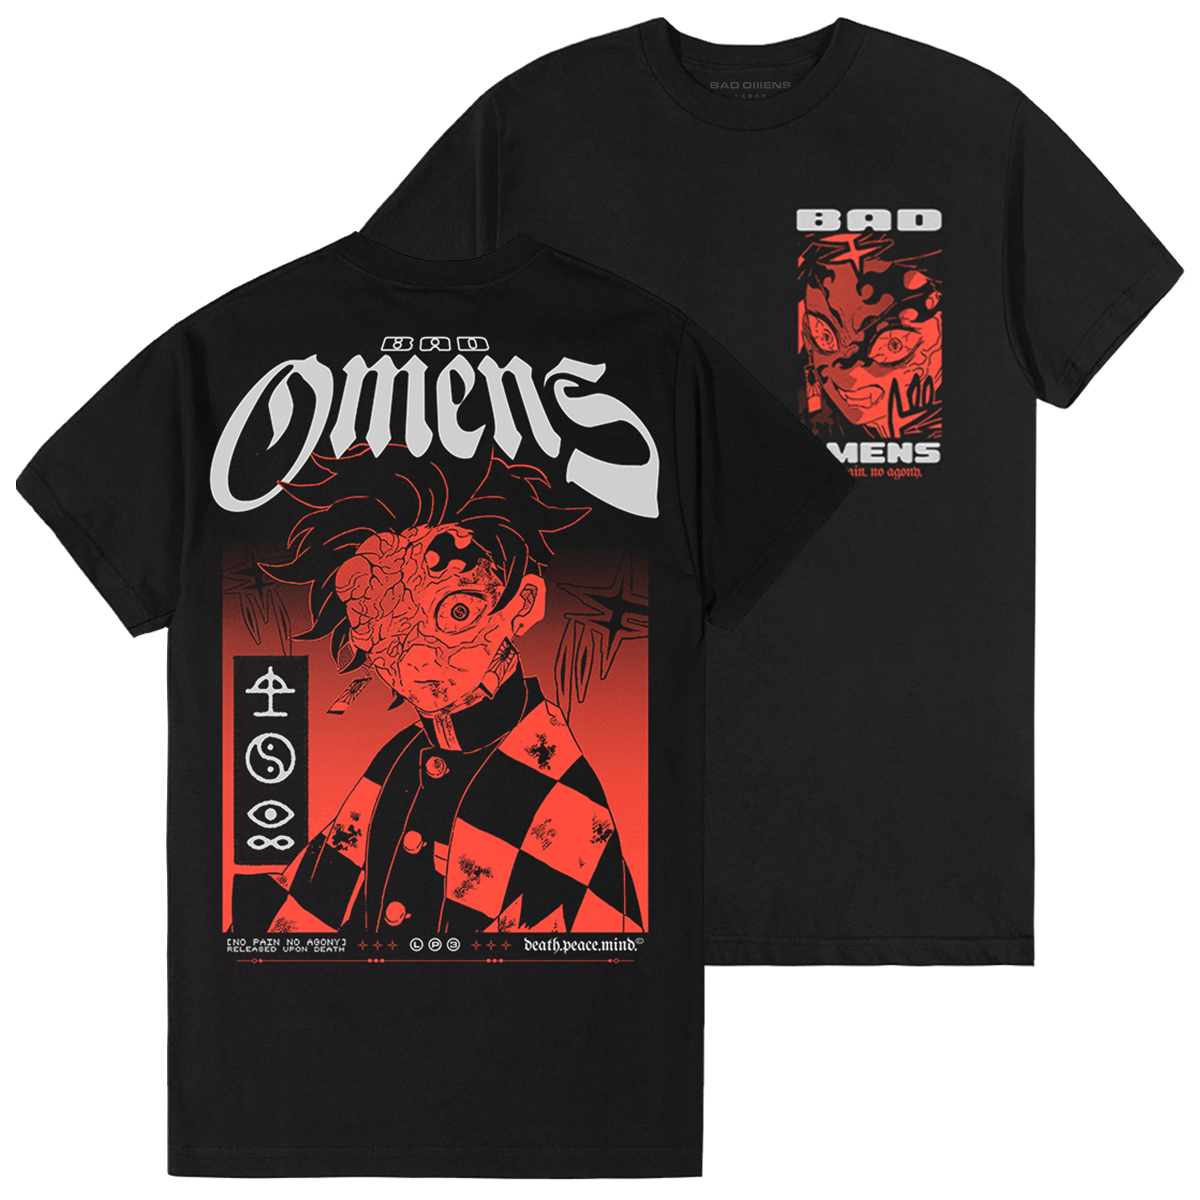 All – Bad Omens store